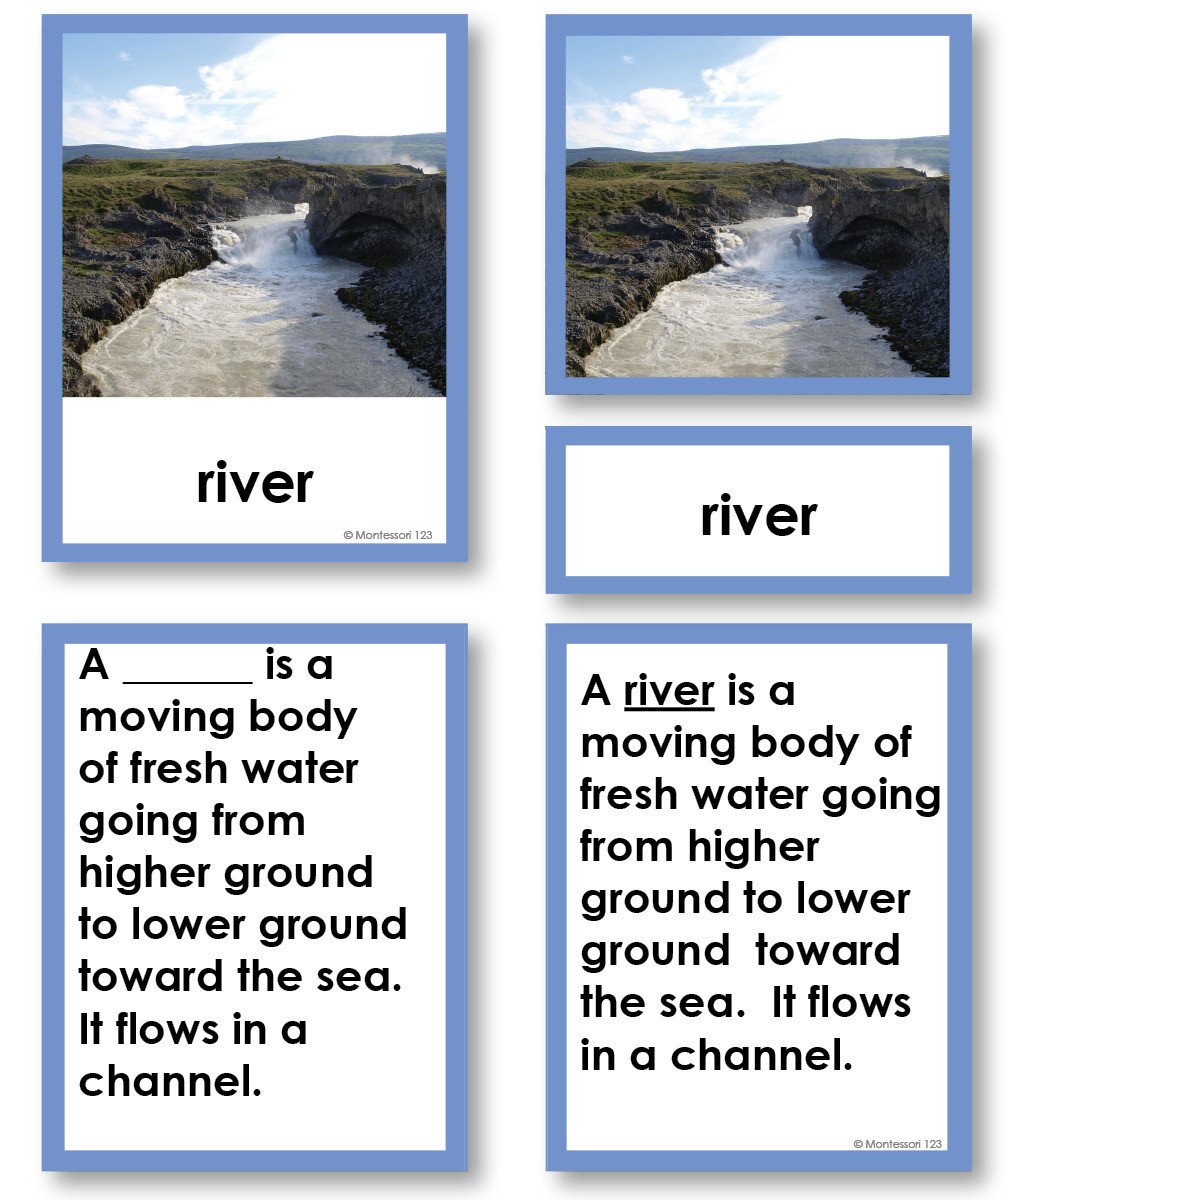 Geography Material-Landforms & Biomes - Parts Of A River 3-Part Cards With Definitions